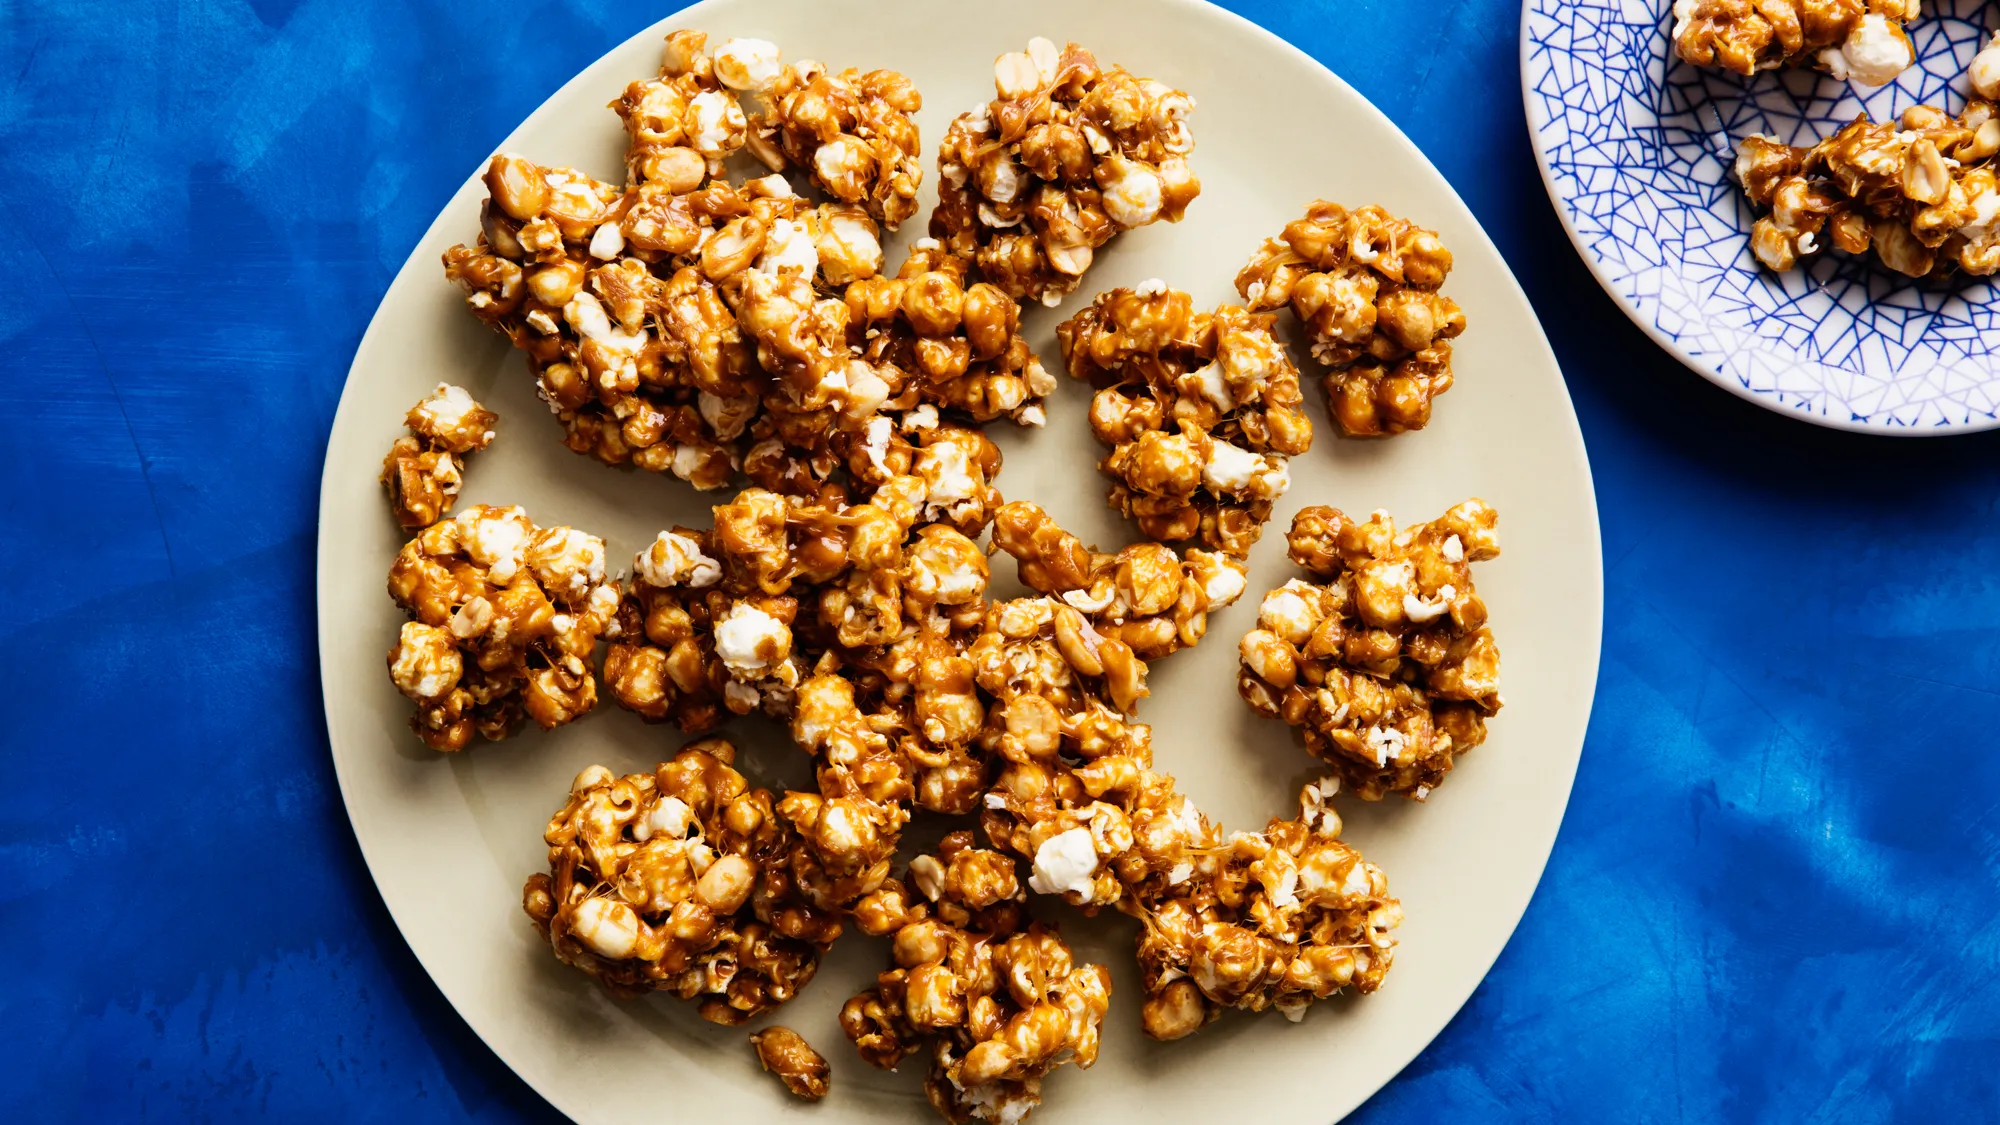 A Sweet and Savoury Treat: How Caramel Popcorn Became a Classic Snack